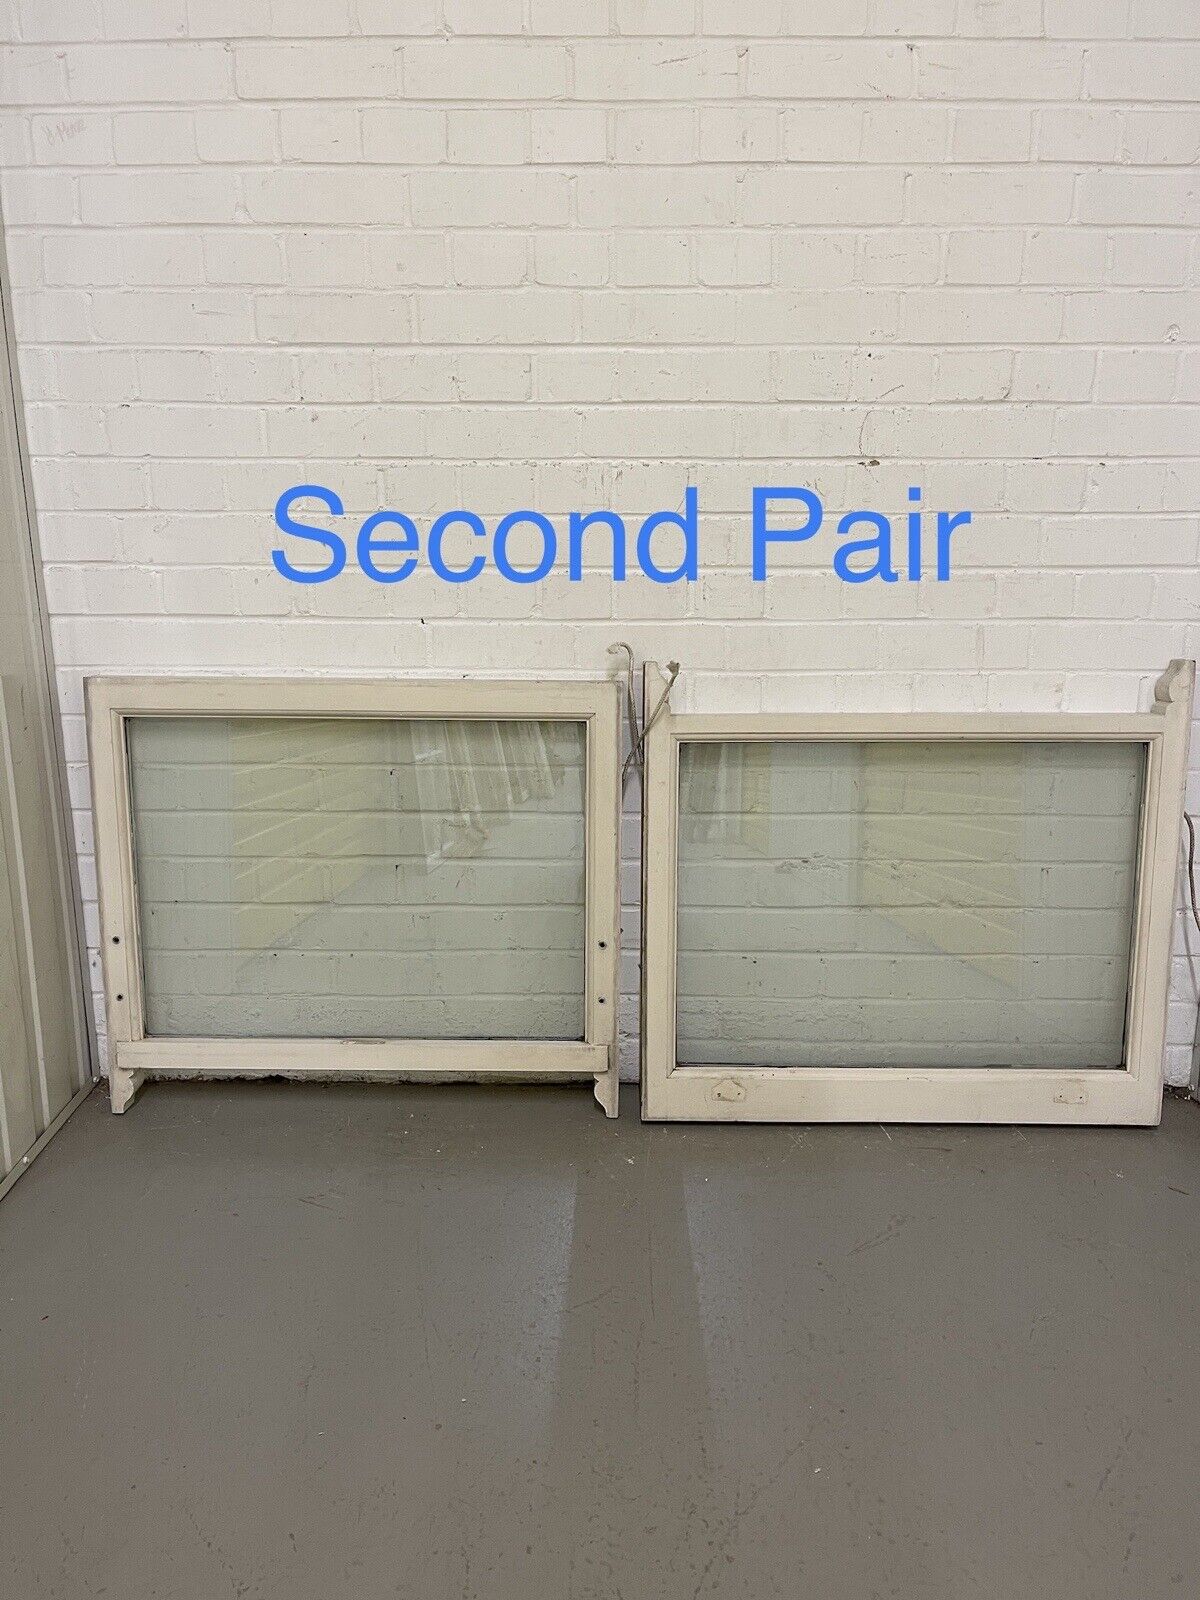 Two Pairs Of Double Glazed Wooden Sash Windows 803x687 798x715 803x688 803x715mm